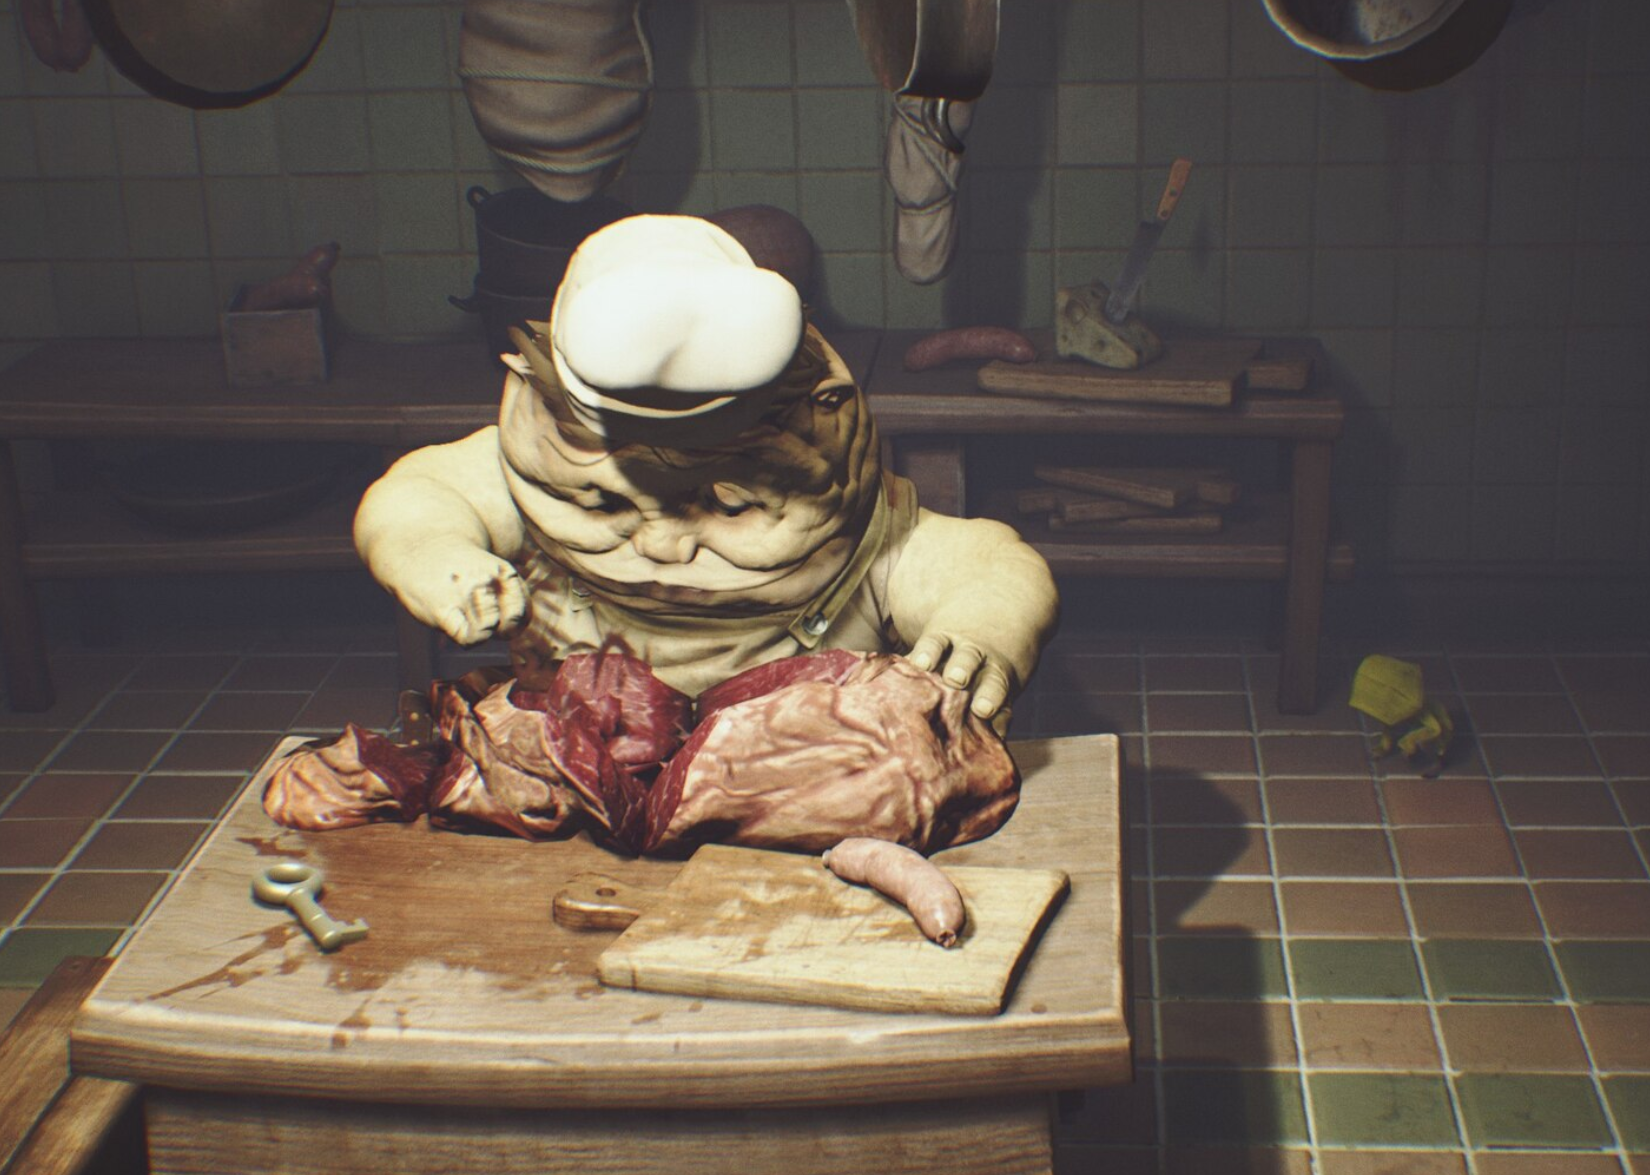 Can a 10 year old play little nightmares?